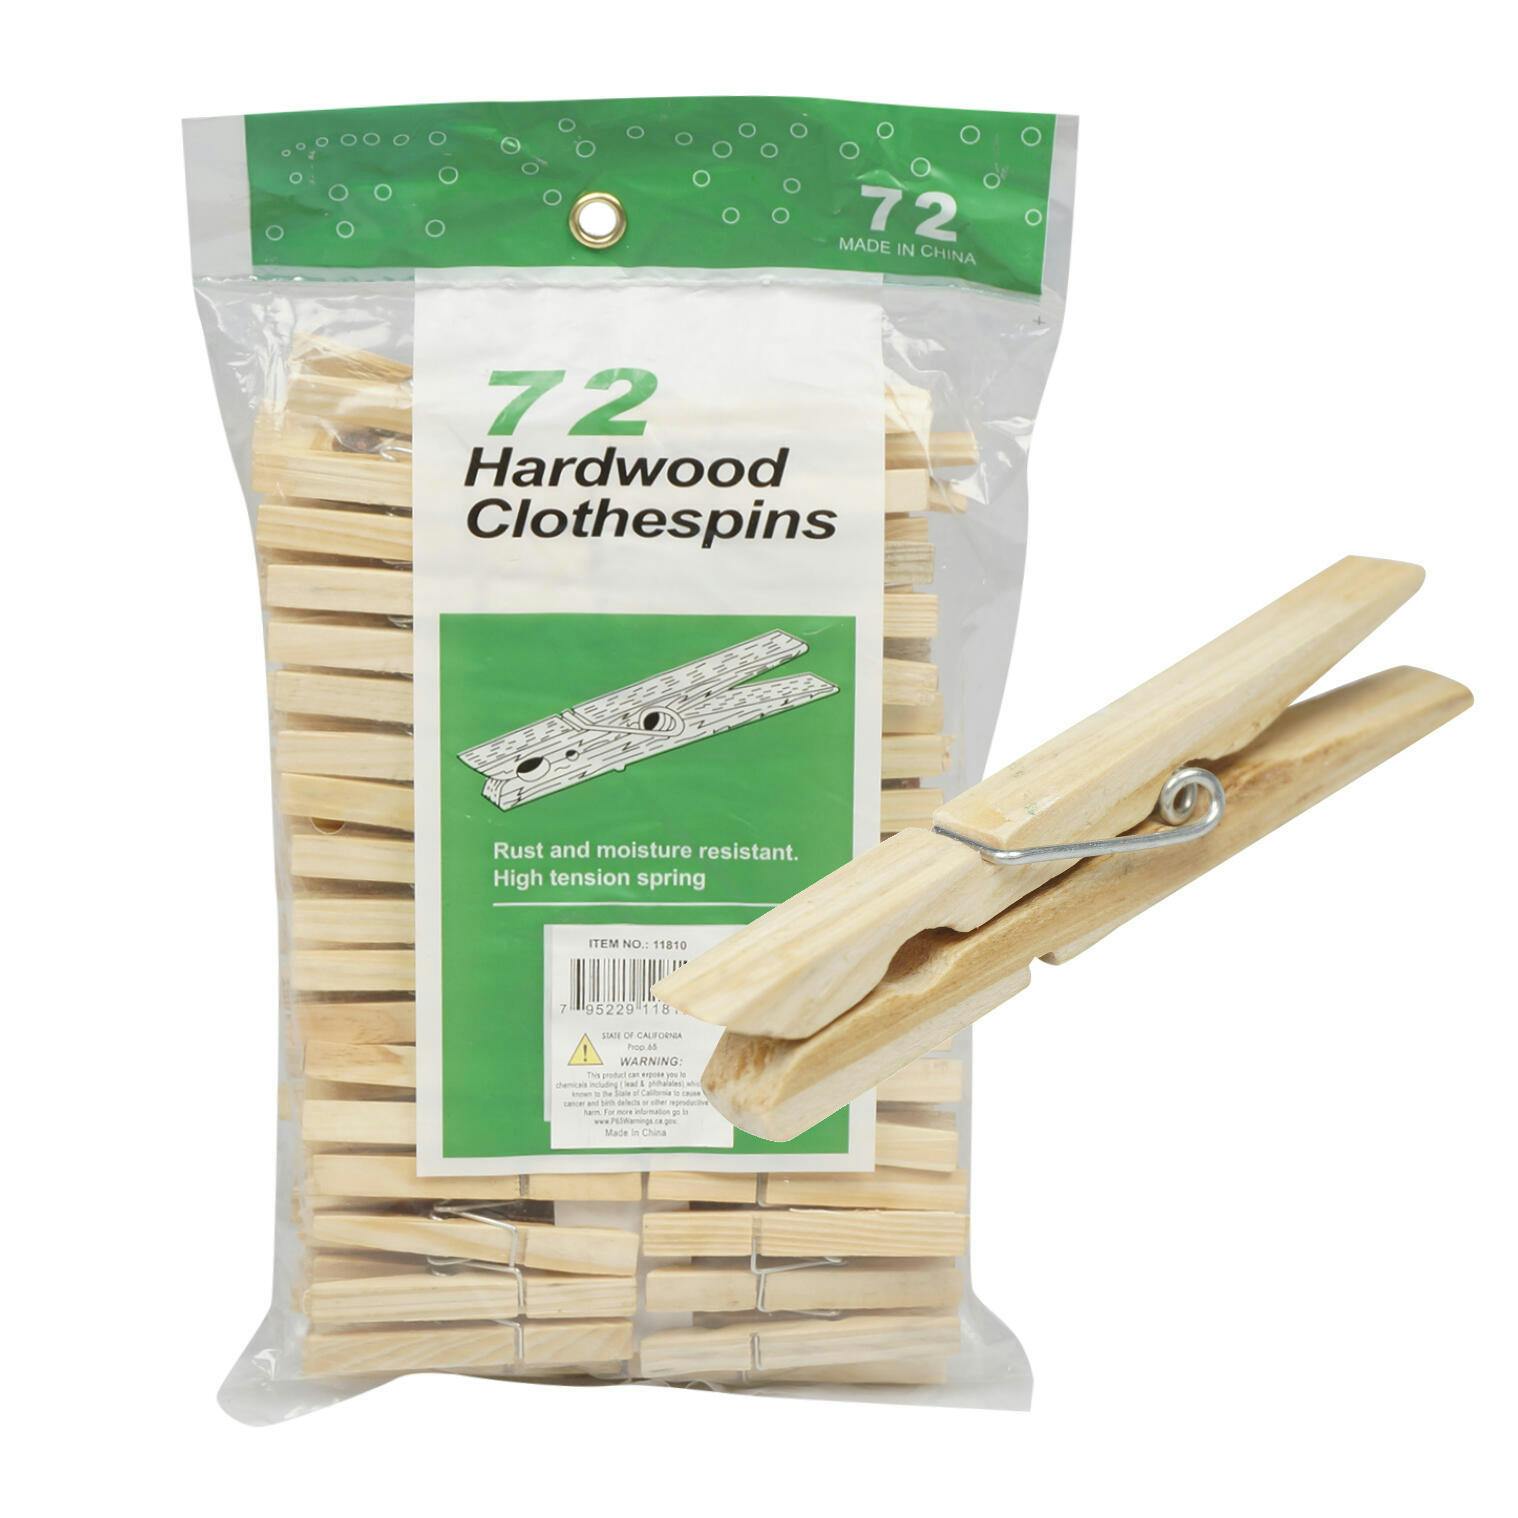 Wholesale Wooden Clothespins 72 Count Sku 2332375 Dollardays